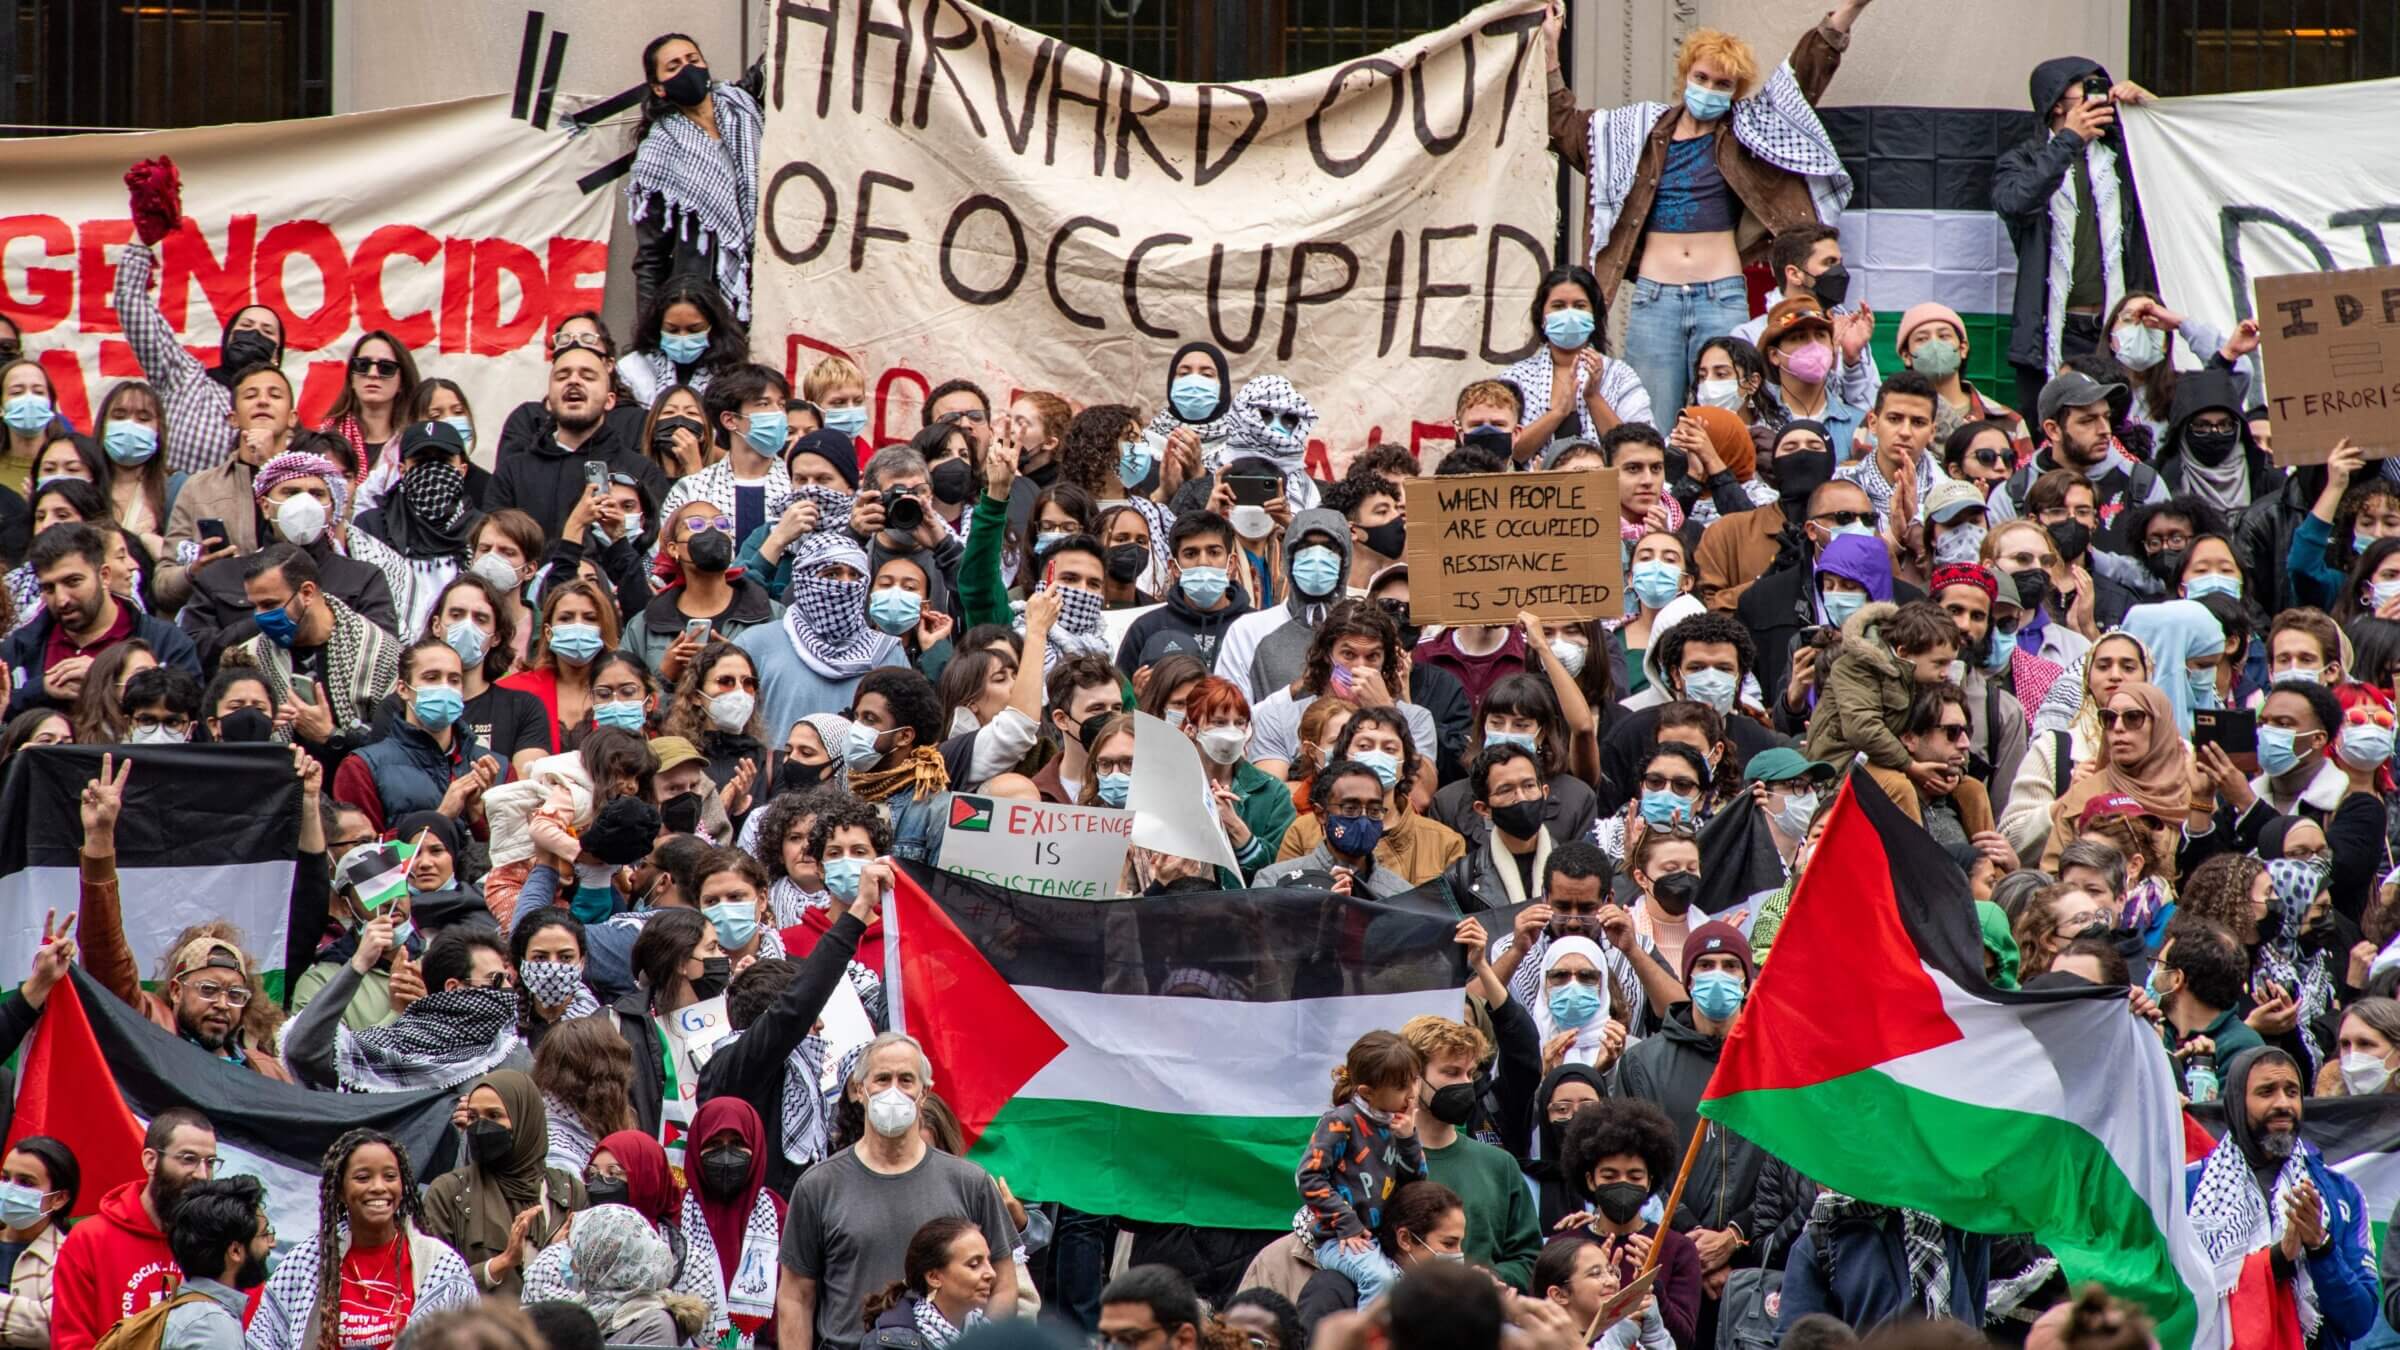 A rally at Harvard University in Cambridge, Massachusetts, on Oct. 14 shows support for Palestinians in Gaza.